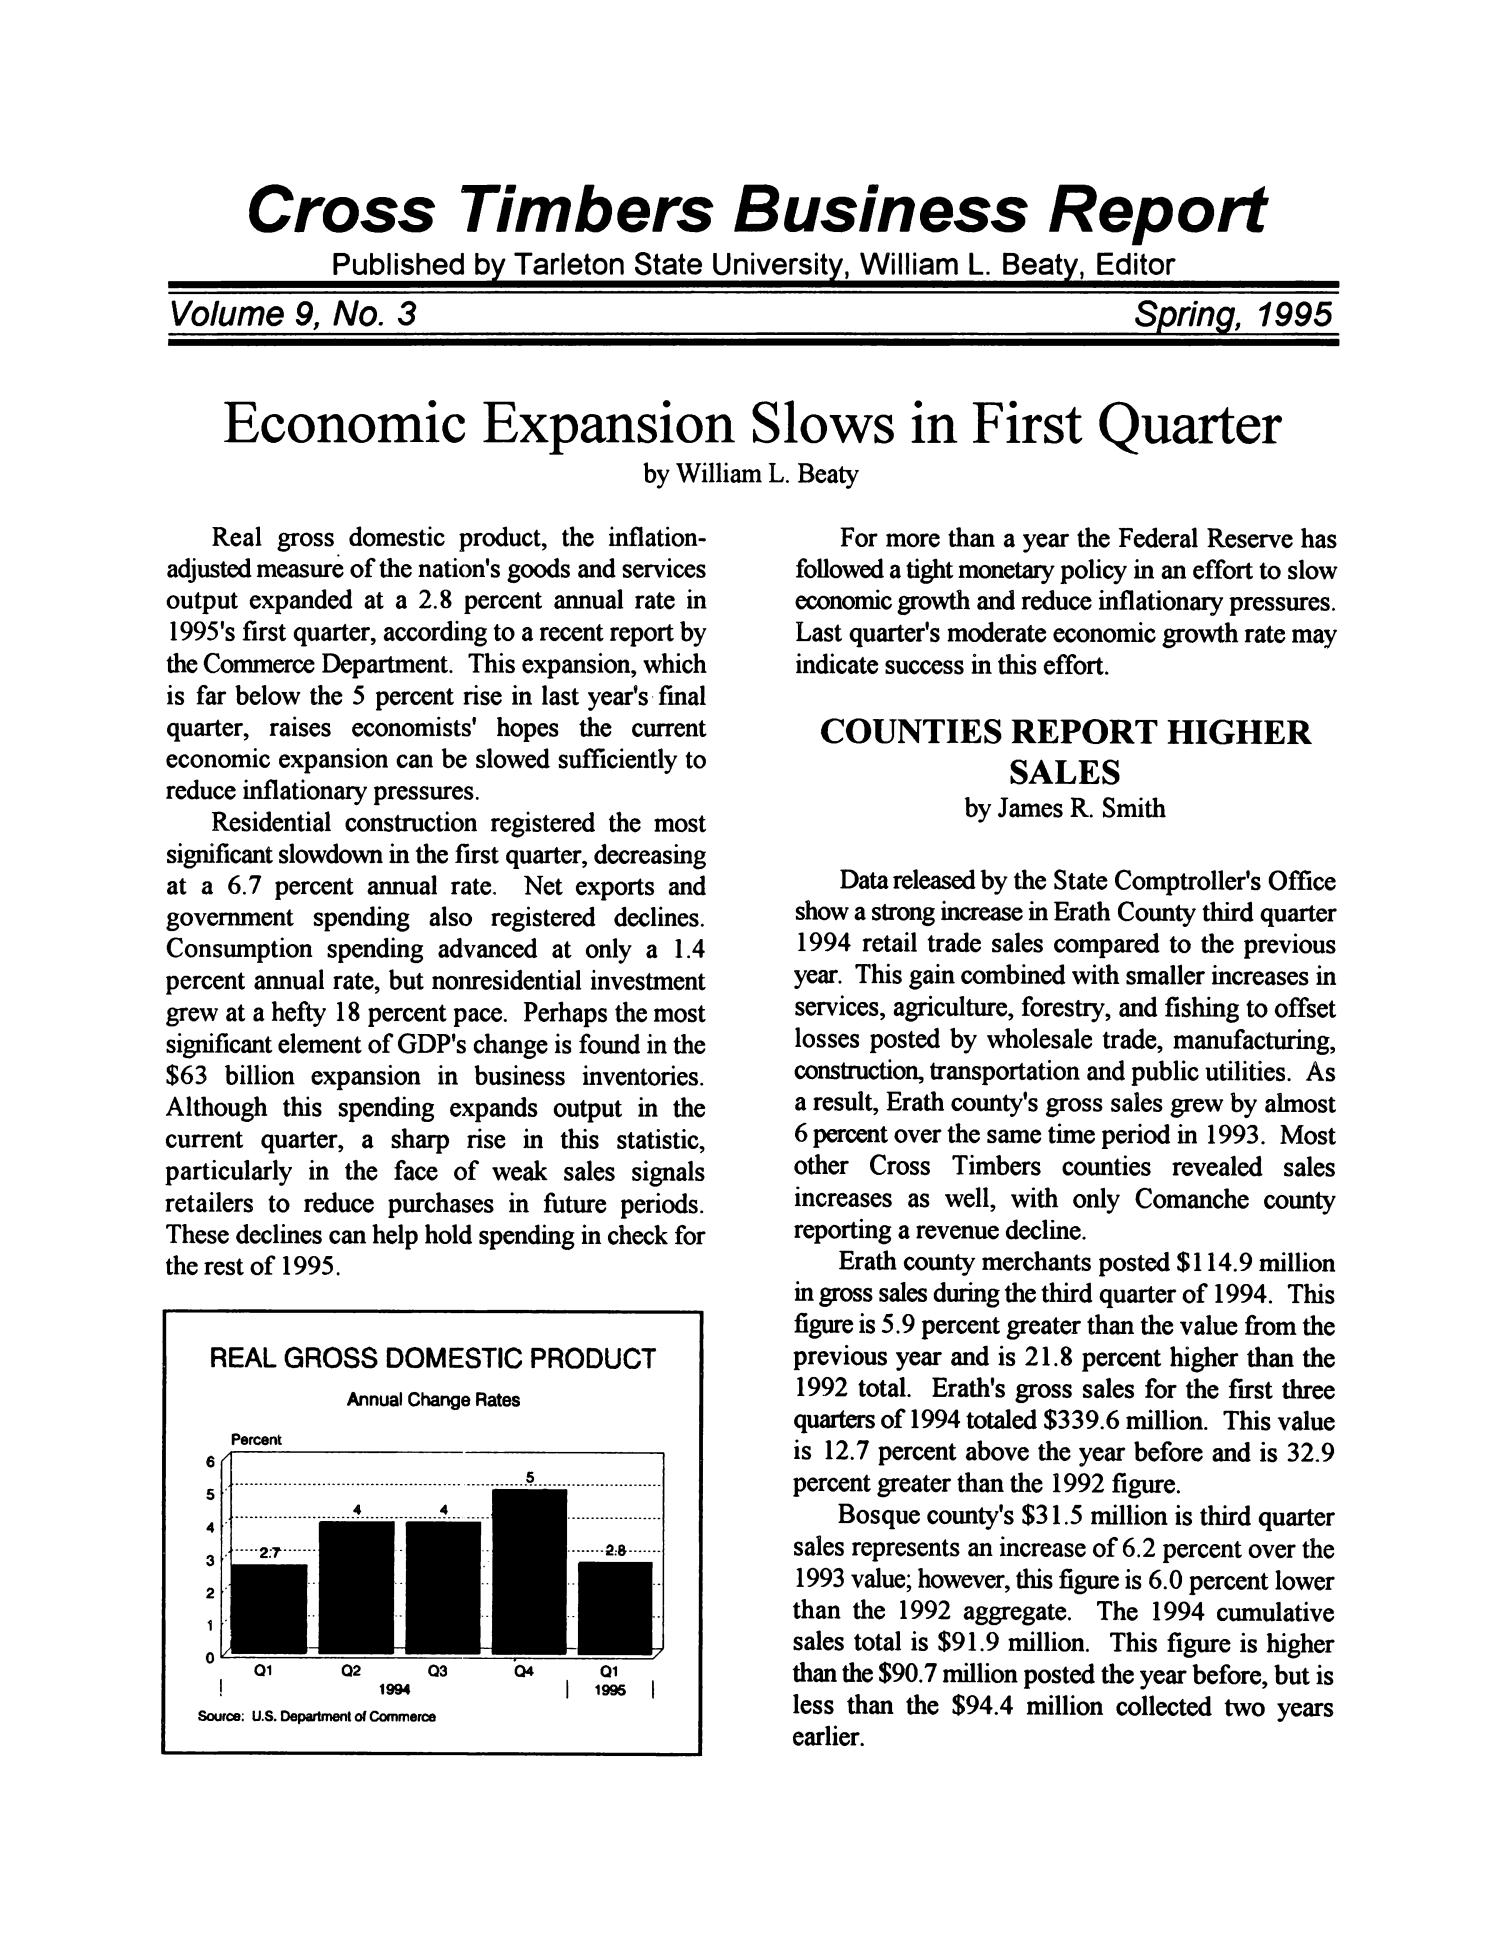 Cross Timbers Business Report, Volume 9, Number 3, Spring 1995
                                                
                                                    1
                                                